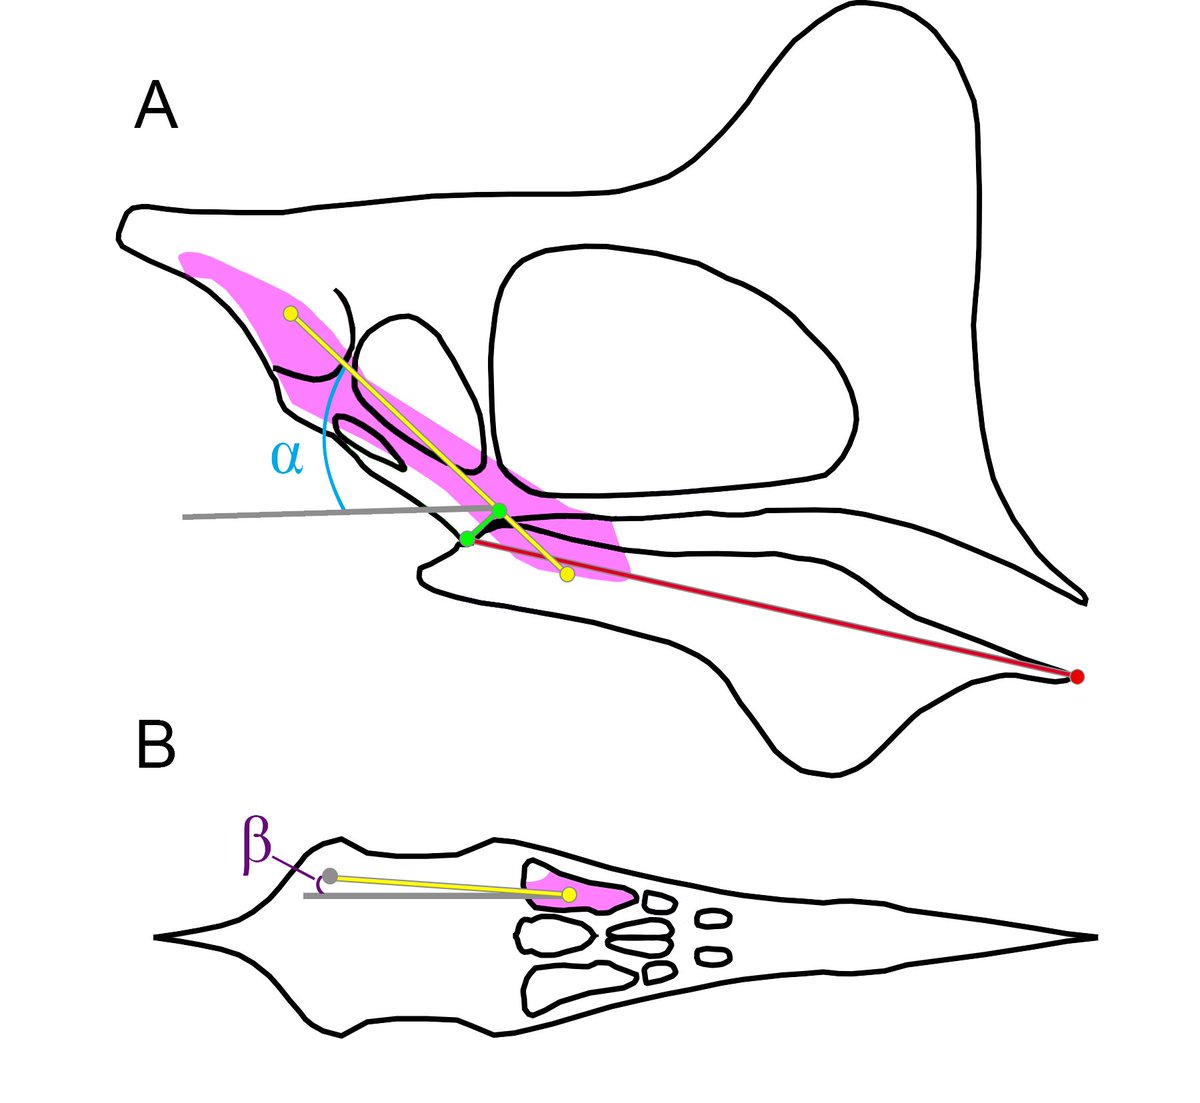 It’s out! I'm glad to present a new paper, which derives from my Masters dissertation. We explore pterosaur jaw musculature and bite force, attempting to test previous dietary hypotheses. Although these studies have been common for dinosaurs, this is a first for pterosaurs! [1/4]